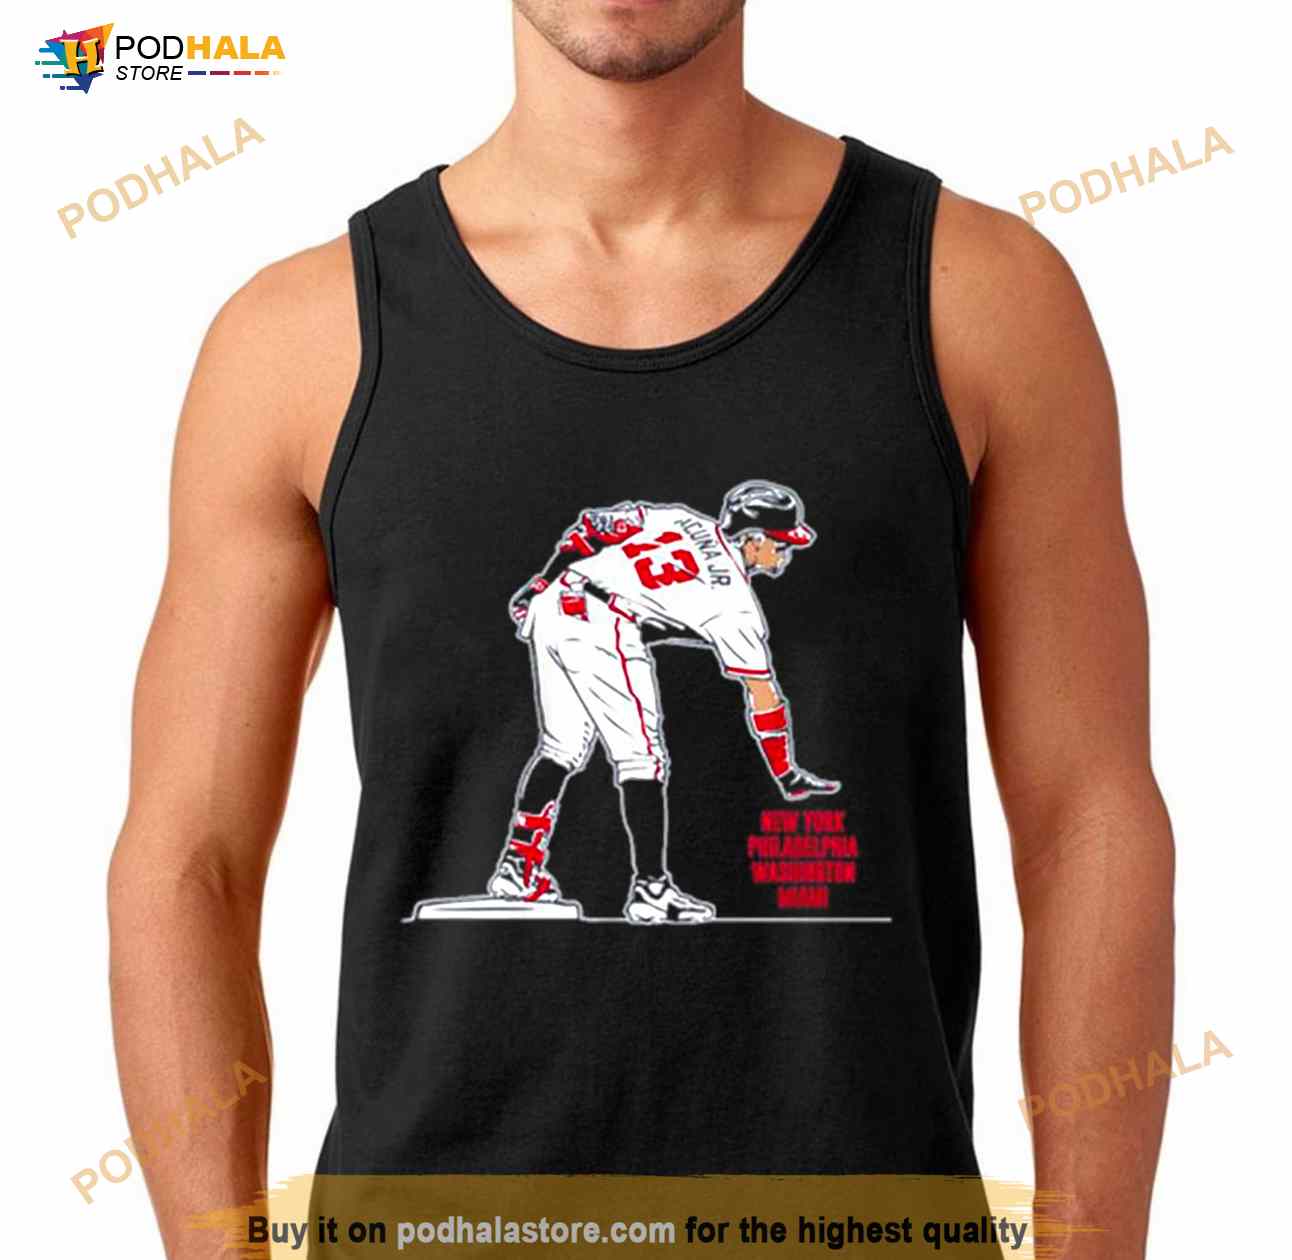 Ronald AcuñA Jr Atlanta Braves Too Small Shirt - Bring Your Ideas, Thoughts  And Imaginations Into Reality Today